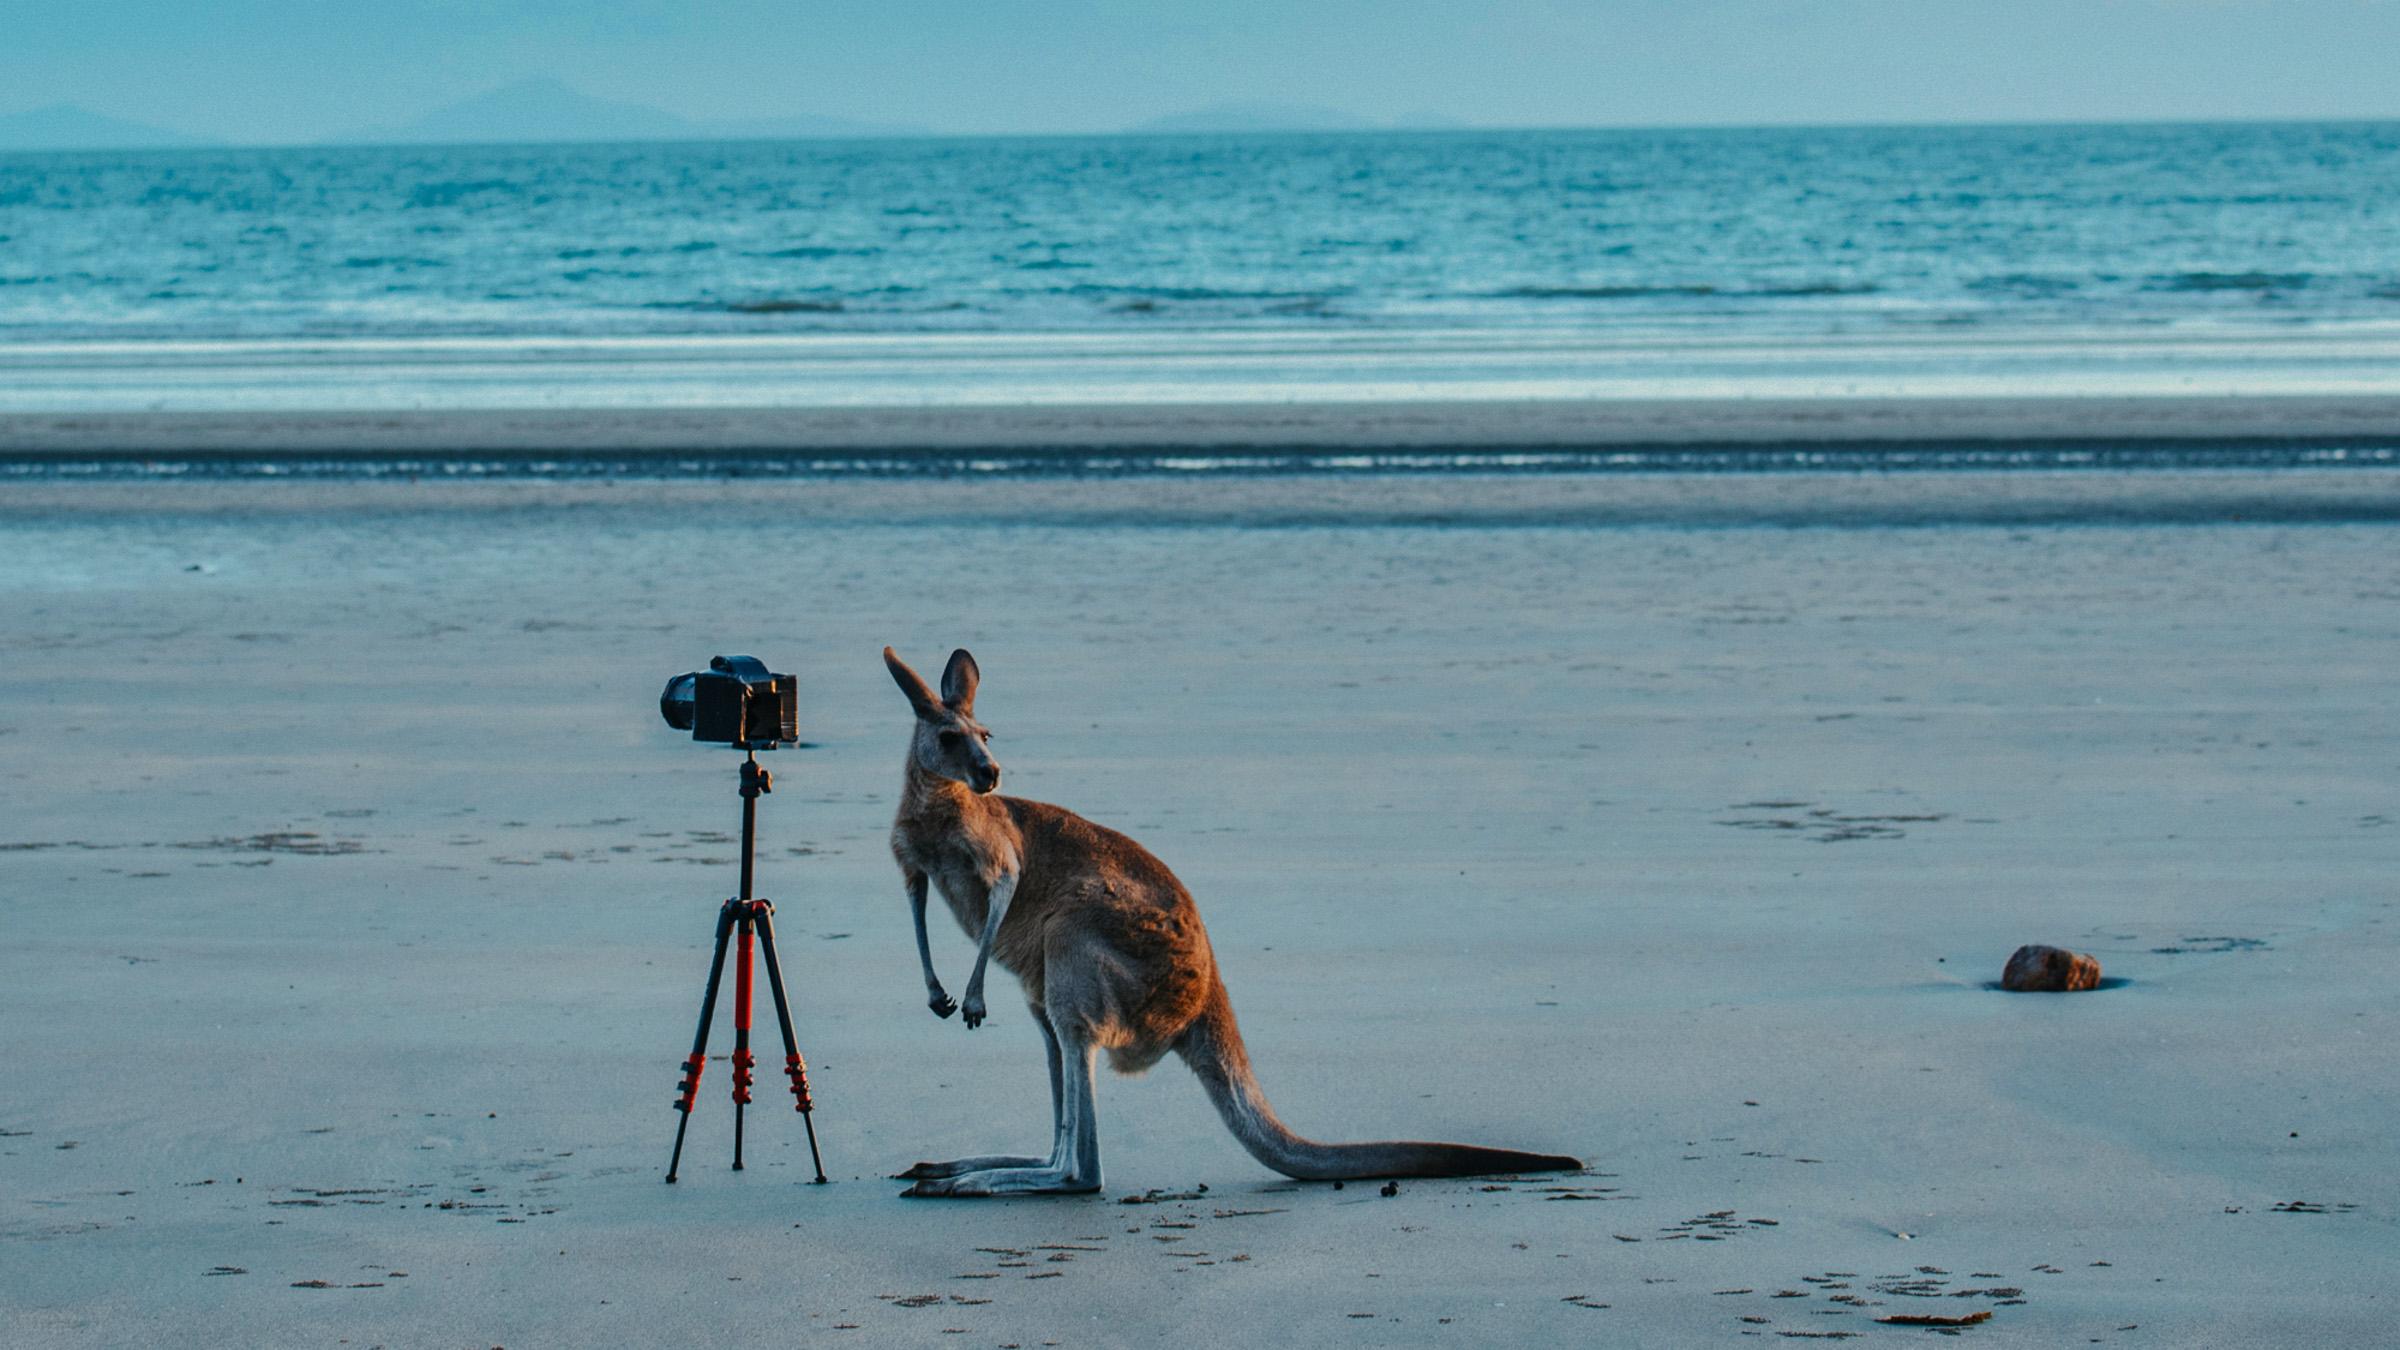 A kangaroo on a beach approaches a camera set up on a stand